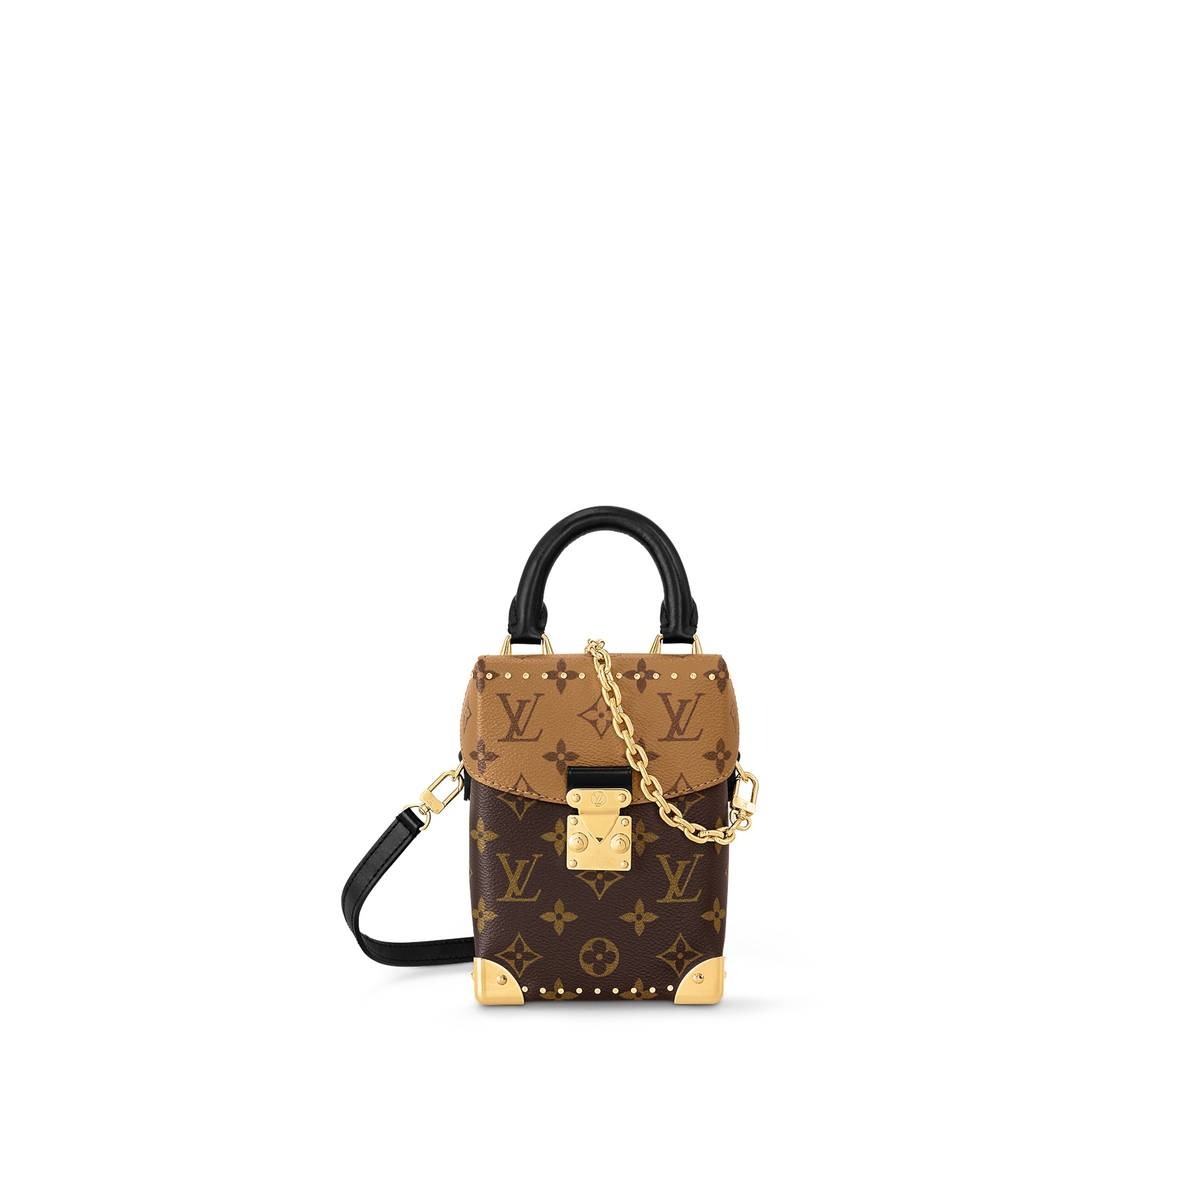 Taylor swift outfits, Taylor swift, Louis vuitton bag neverfull